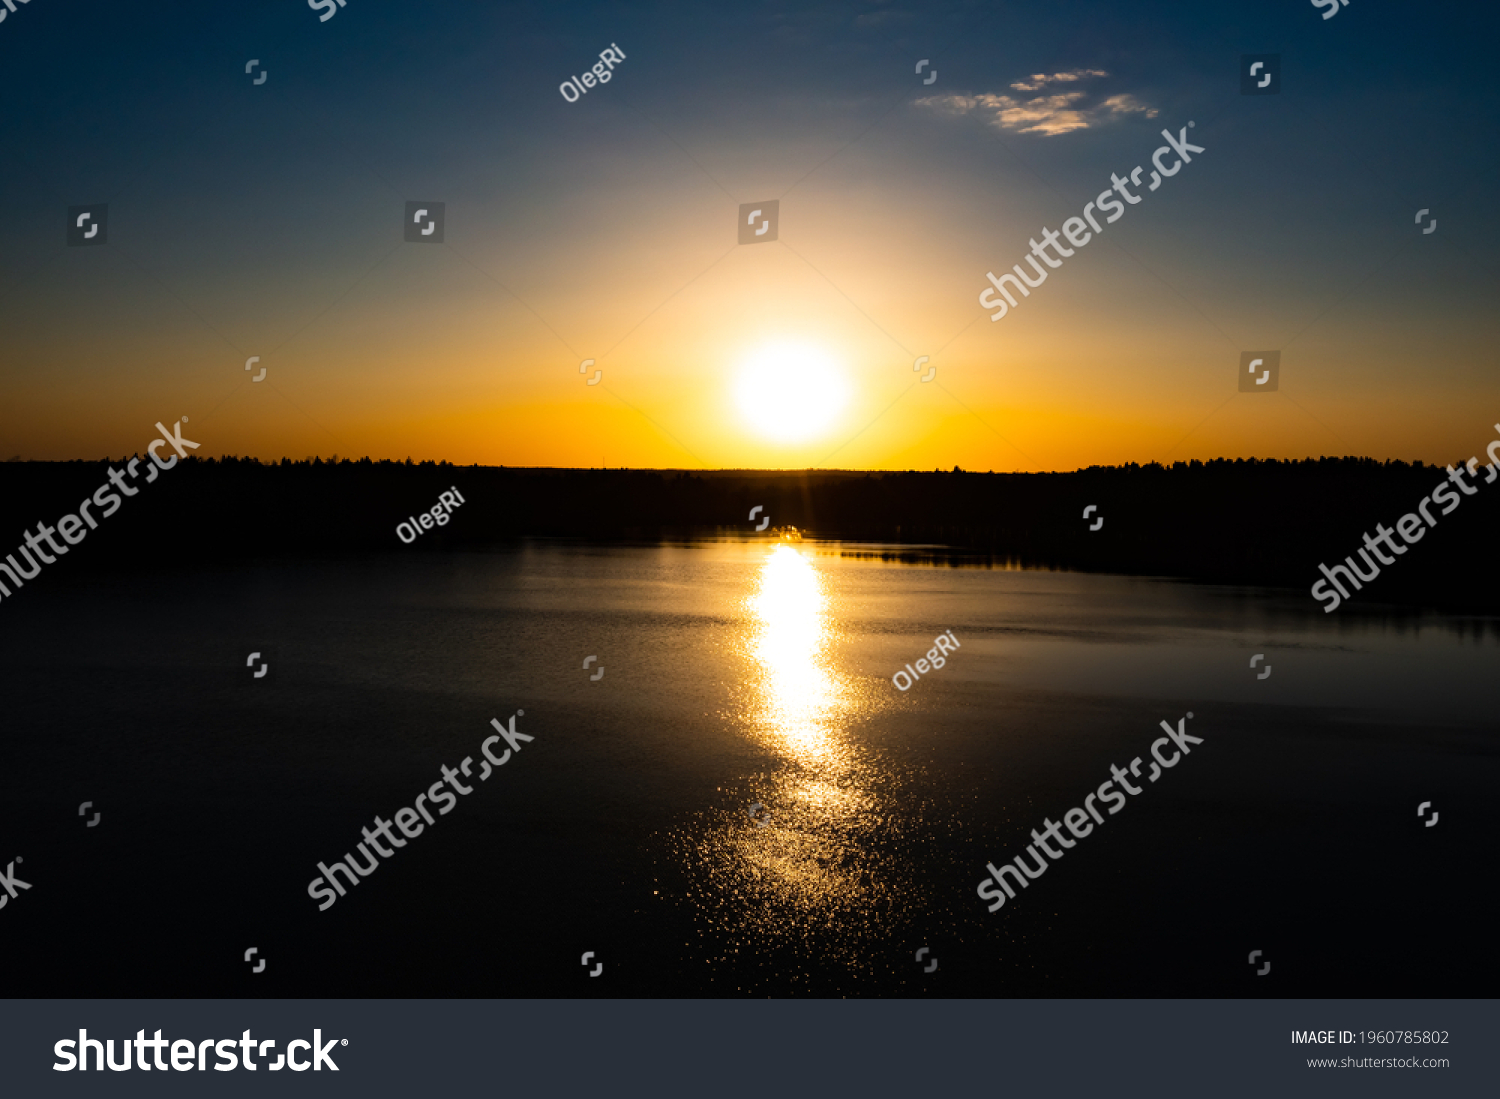 Panorama Of Autumn River Landscape In Belarus Or European Part Of Russia At Sunset. Sun Shine Over Blue Water Lake Or River At Sunrise. Nature At Sunny Morning. Woods With Orange Foliage On Riverside #1960785802